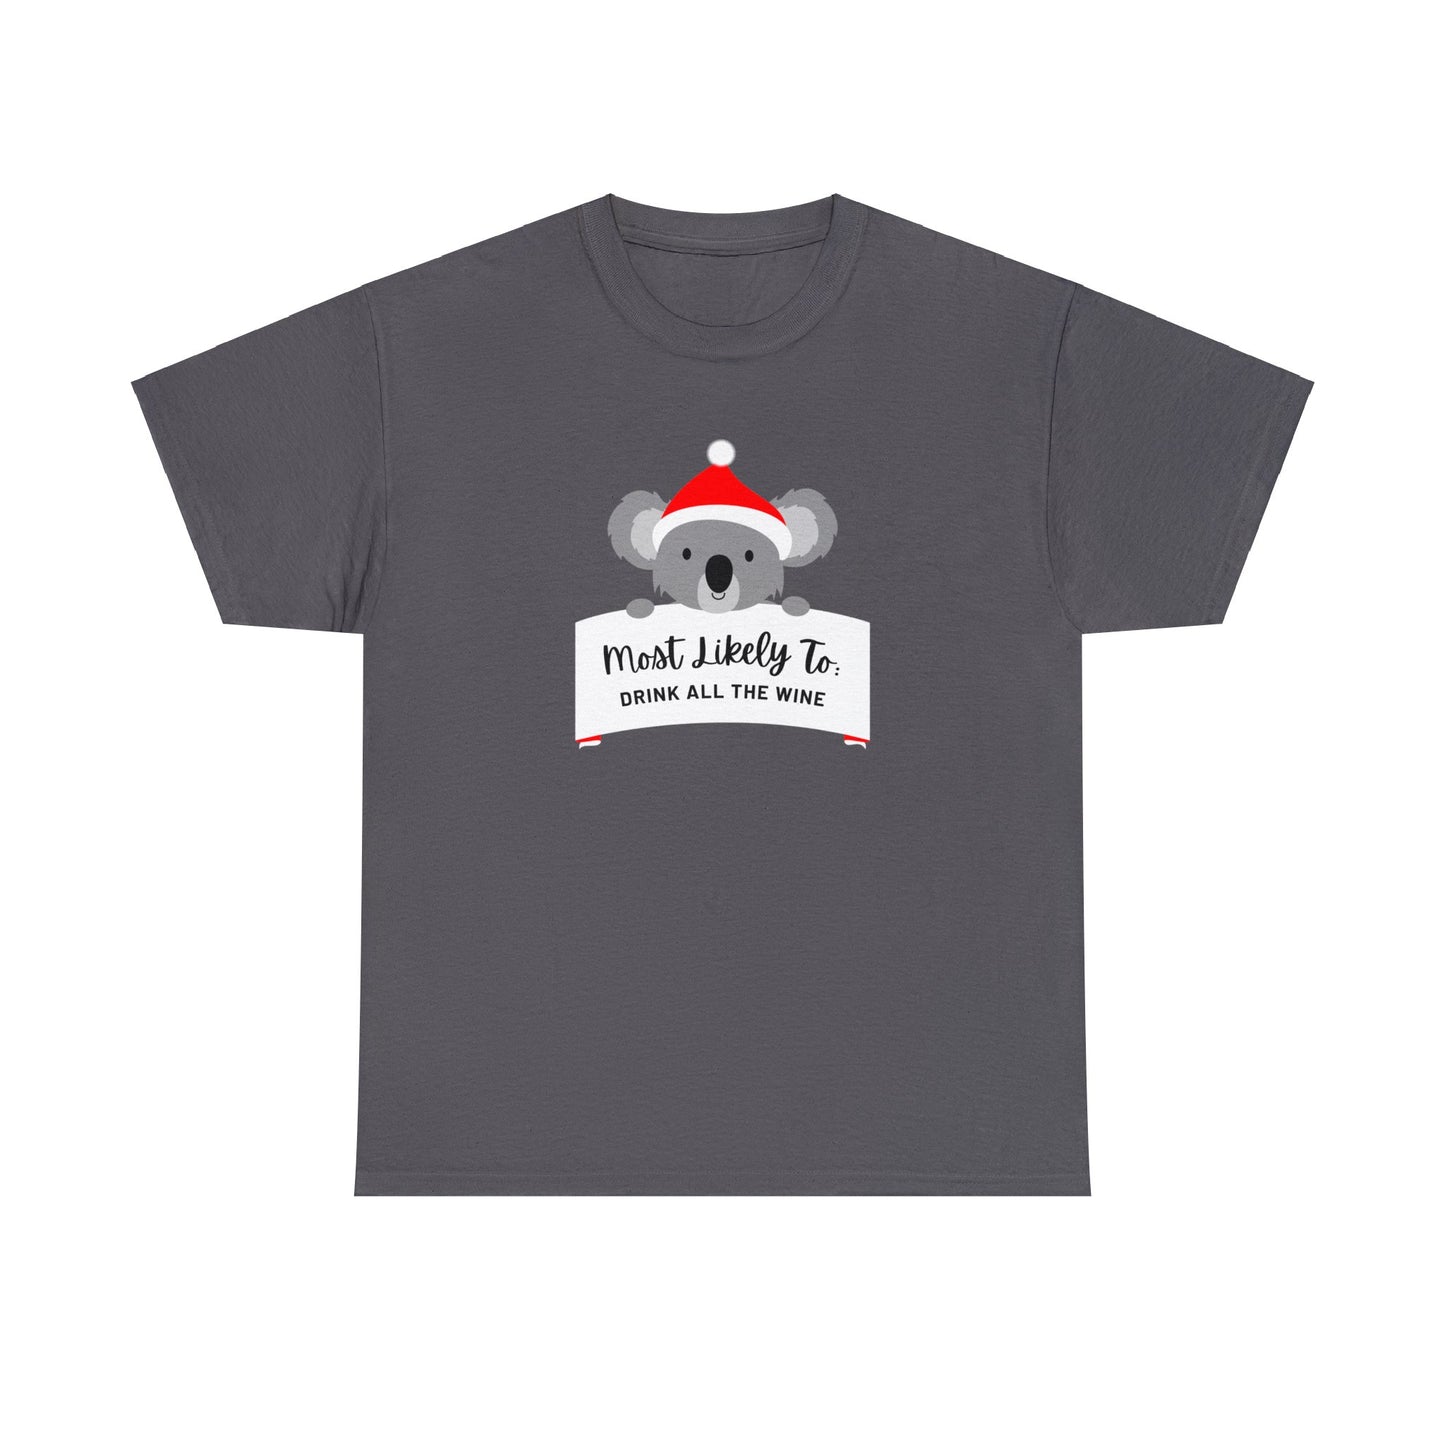 Most Likely To Drink All The Wine - Christmas T-Shirt